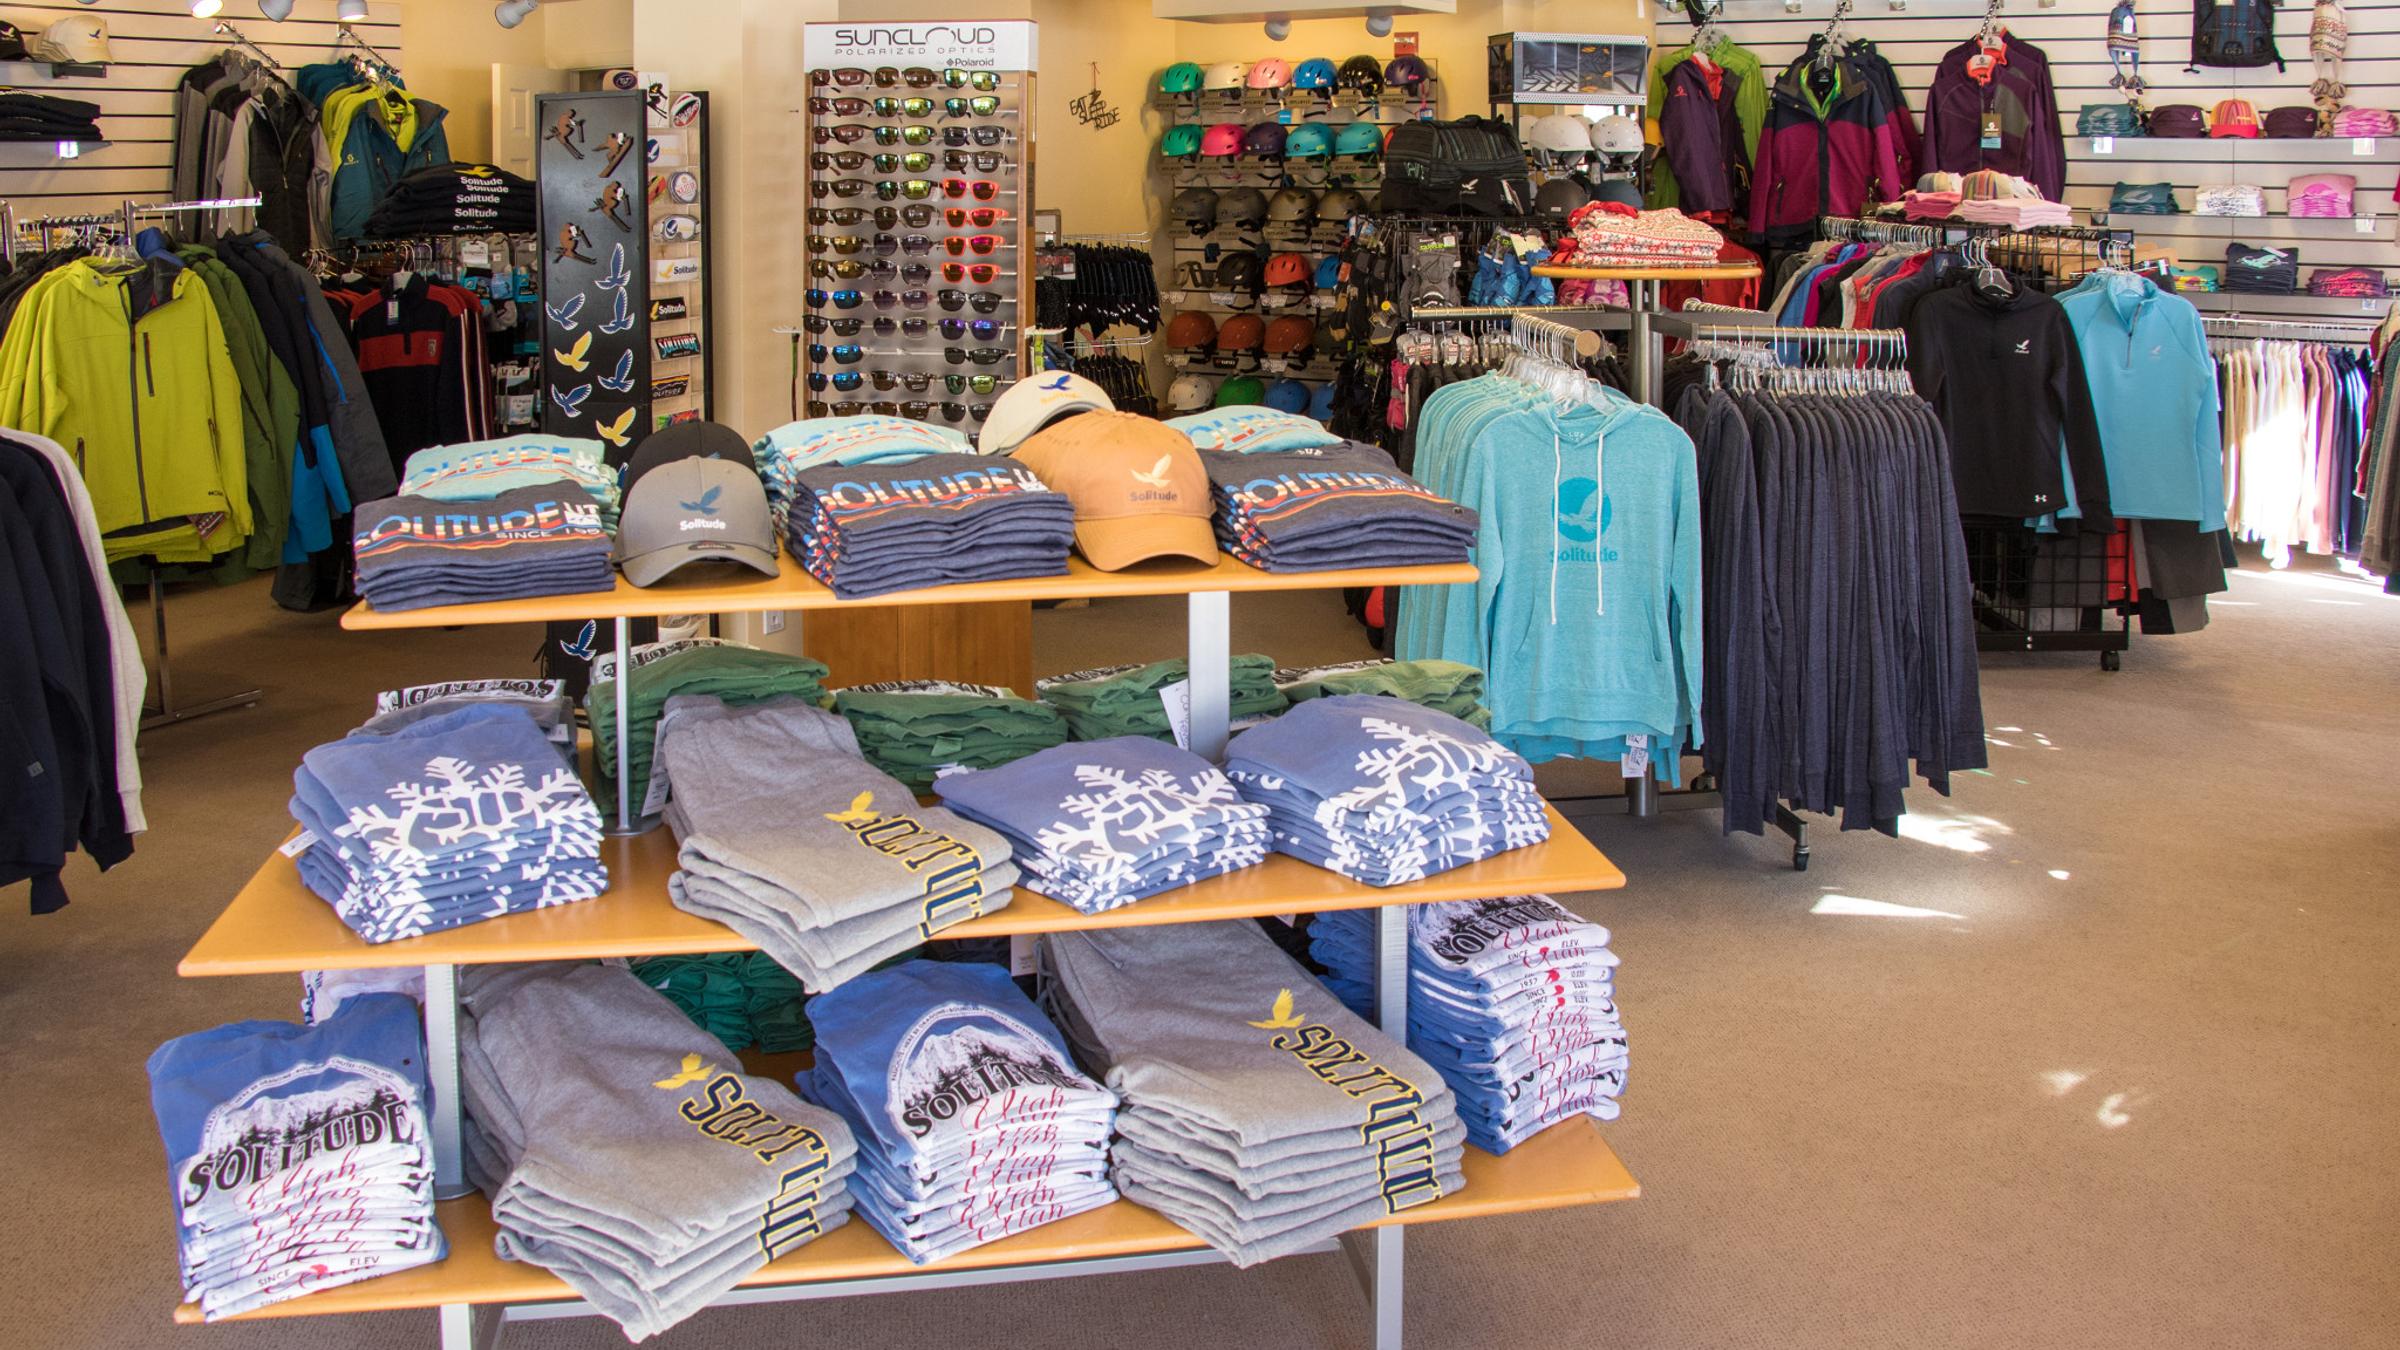 Clothing out on display in the retail store